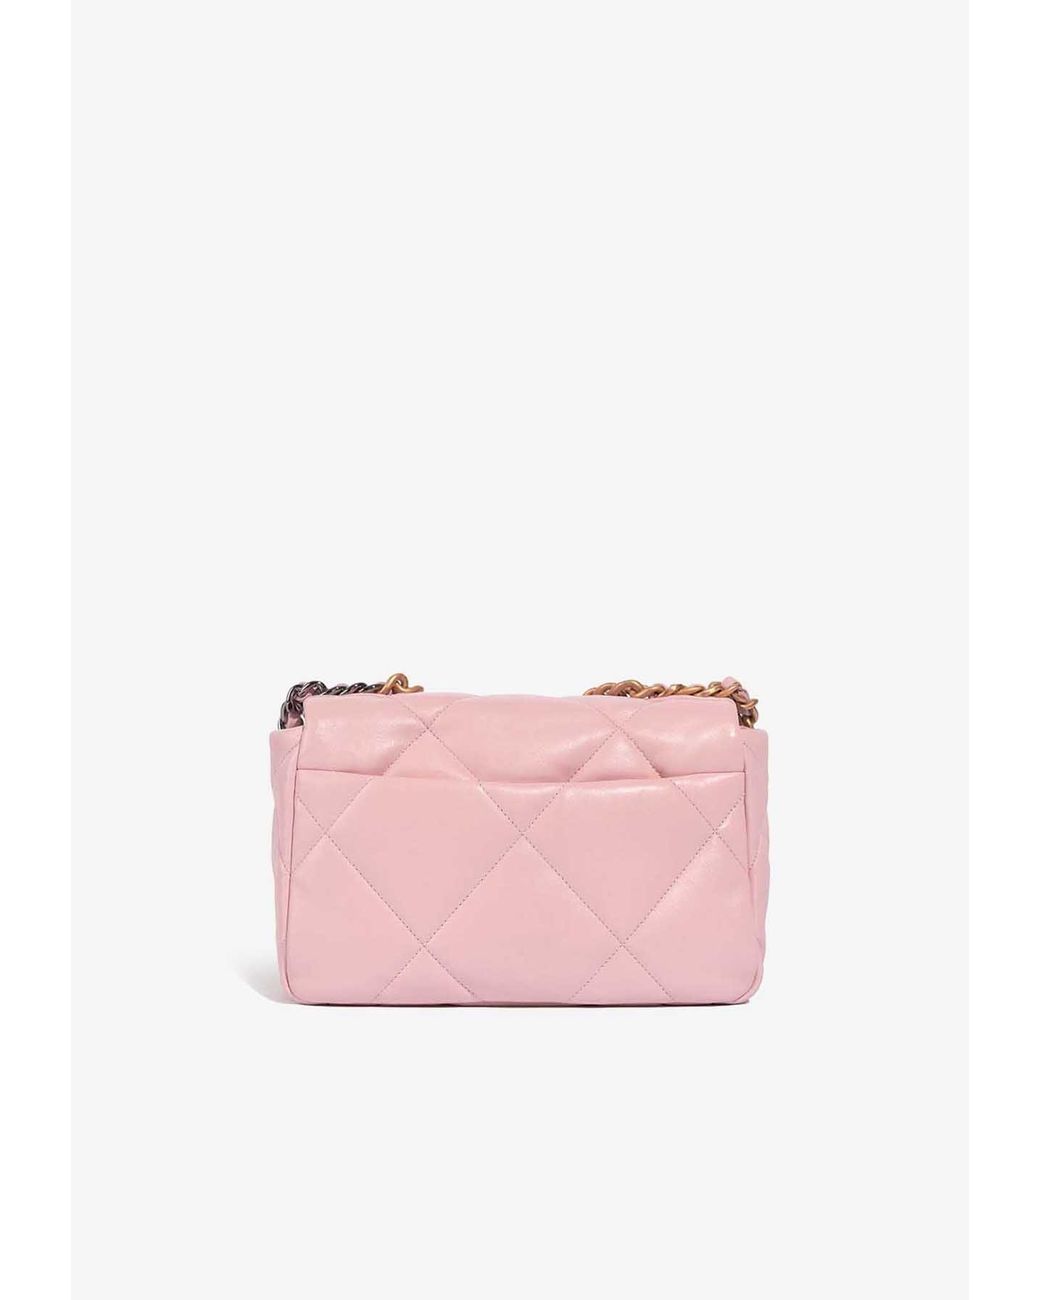 Chanel 19 Flap Bag In Light Rose Lambskin With Gold Hardware in Pink